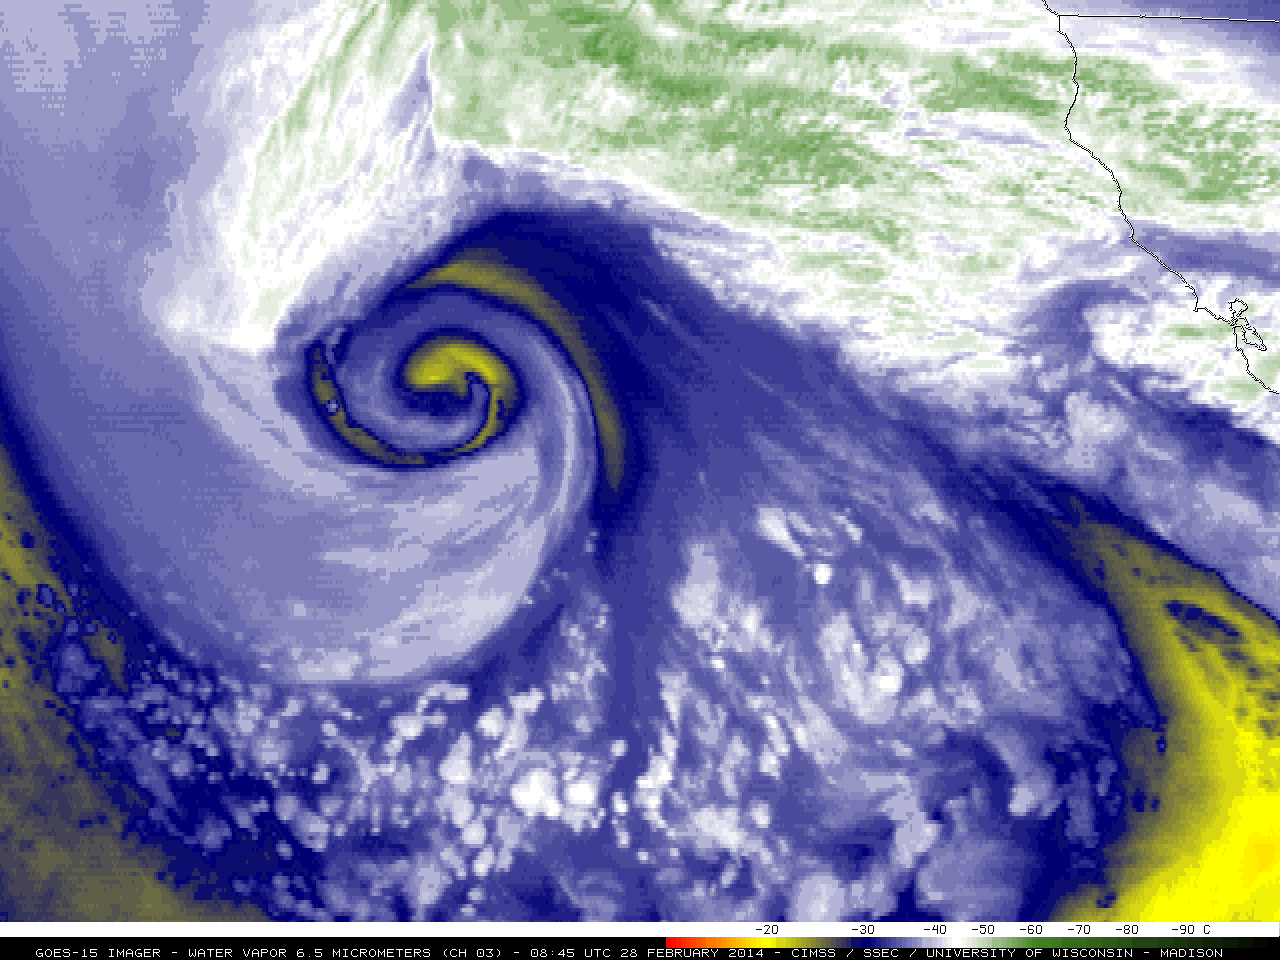 GOES-15 6.5 Âµm water vapor channel images (click to play animation)